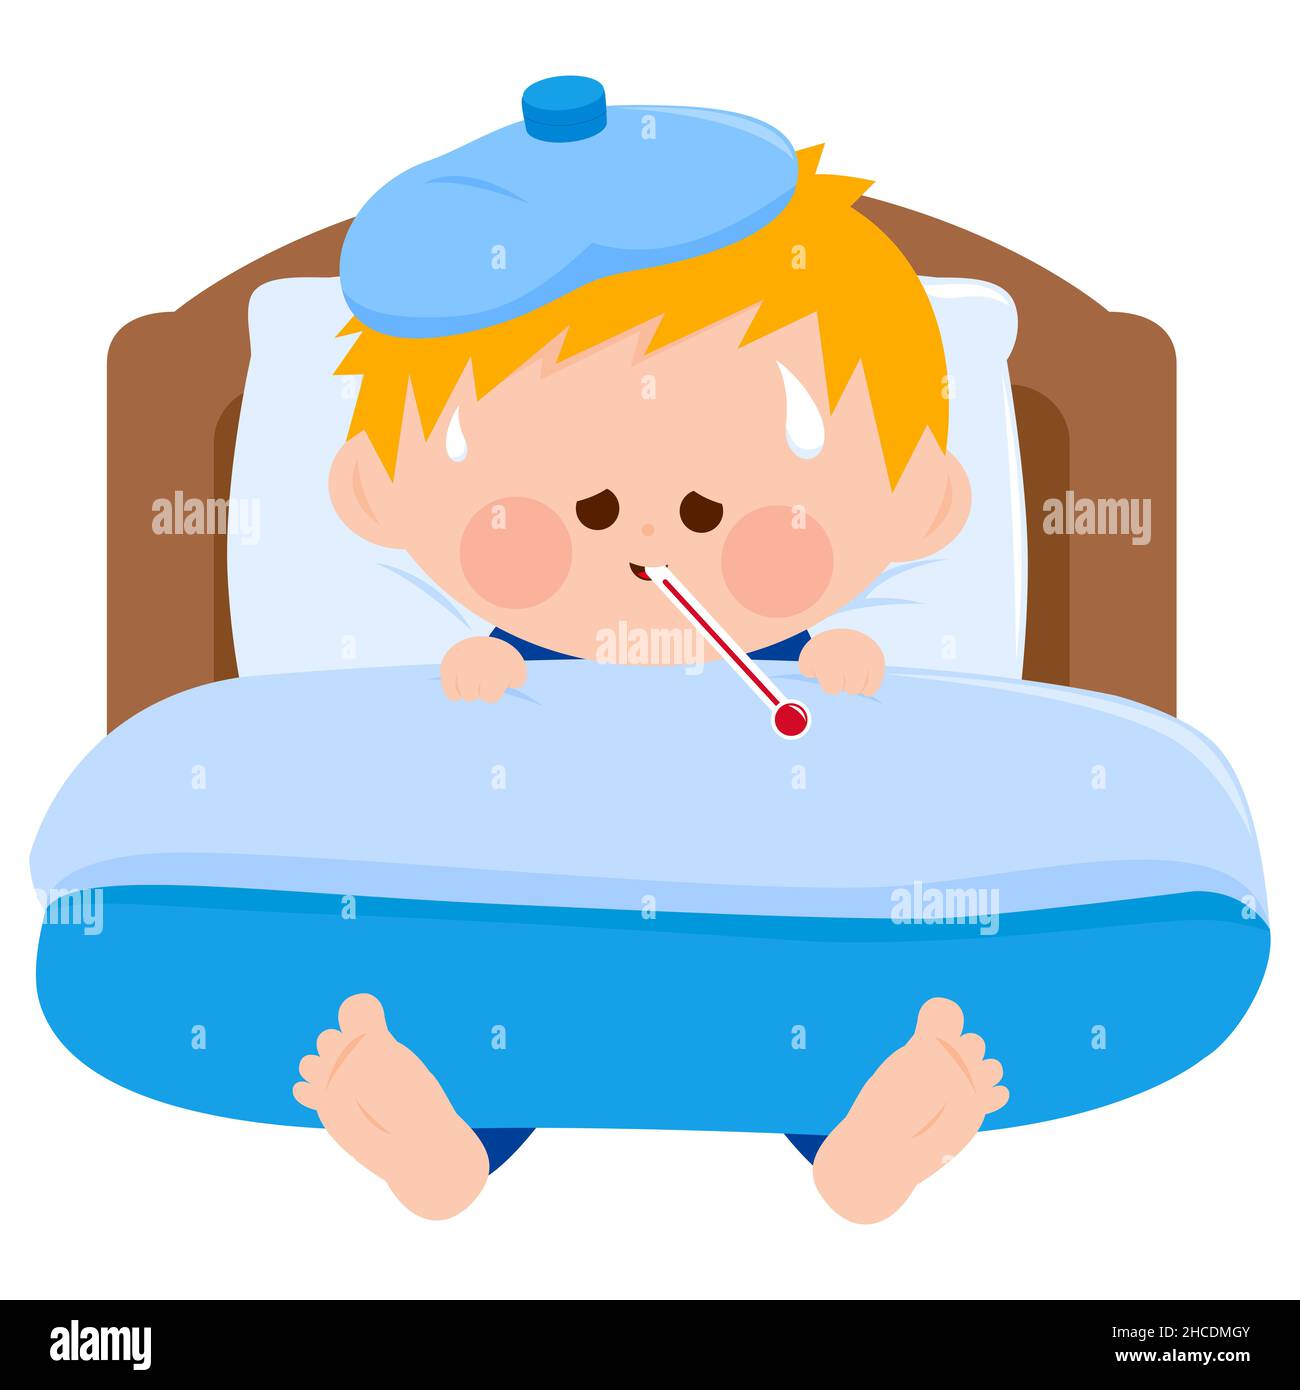 A sick child in bed, using a thermometer and a cool compress. Stock Photo